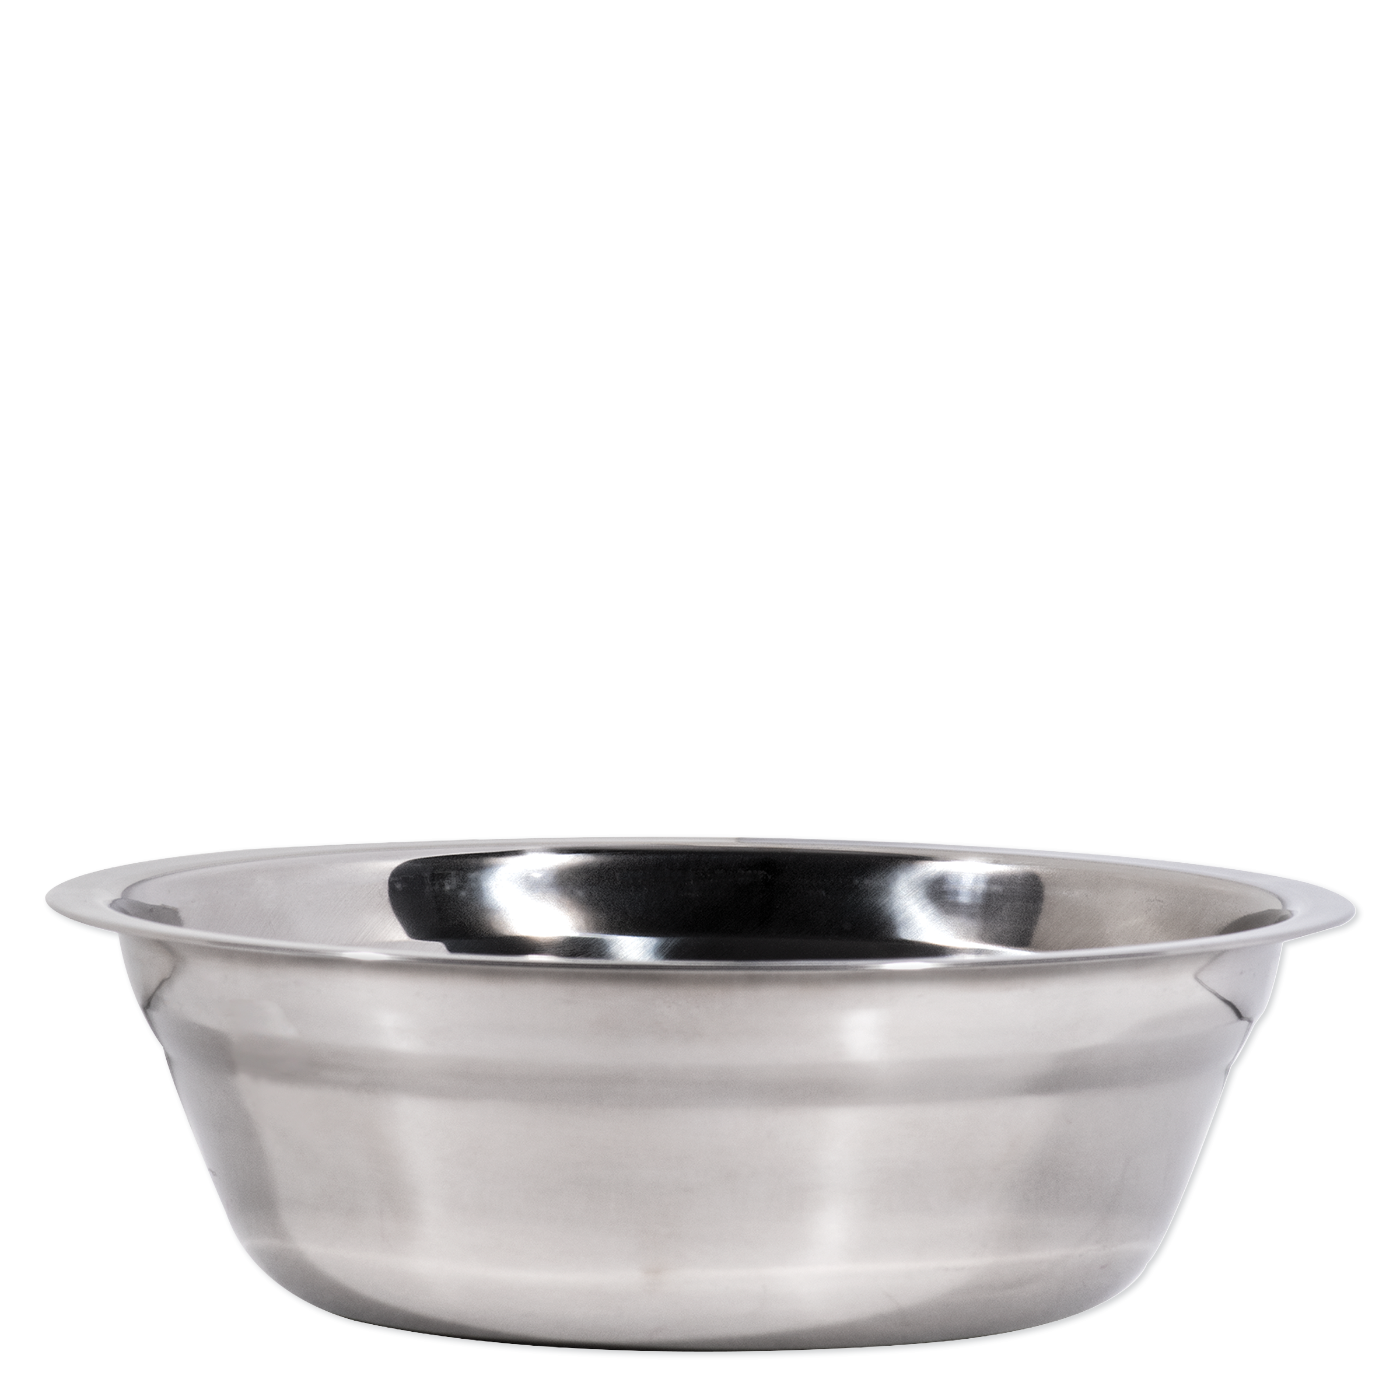 Stainless Steel Mixing Bowl - 1 Quart